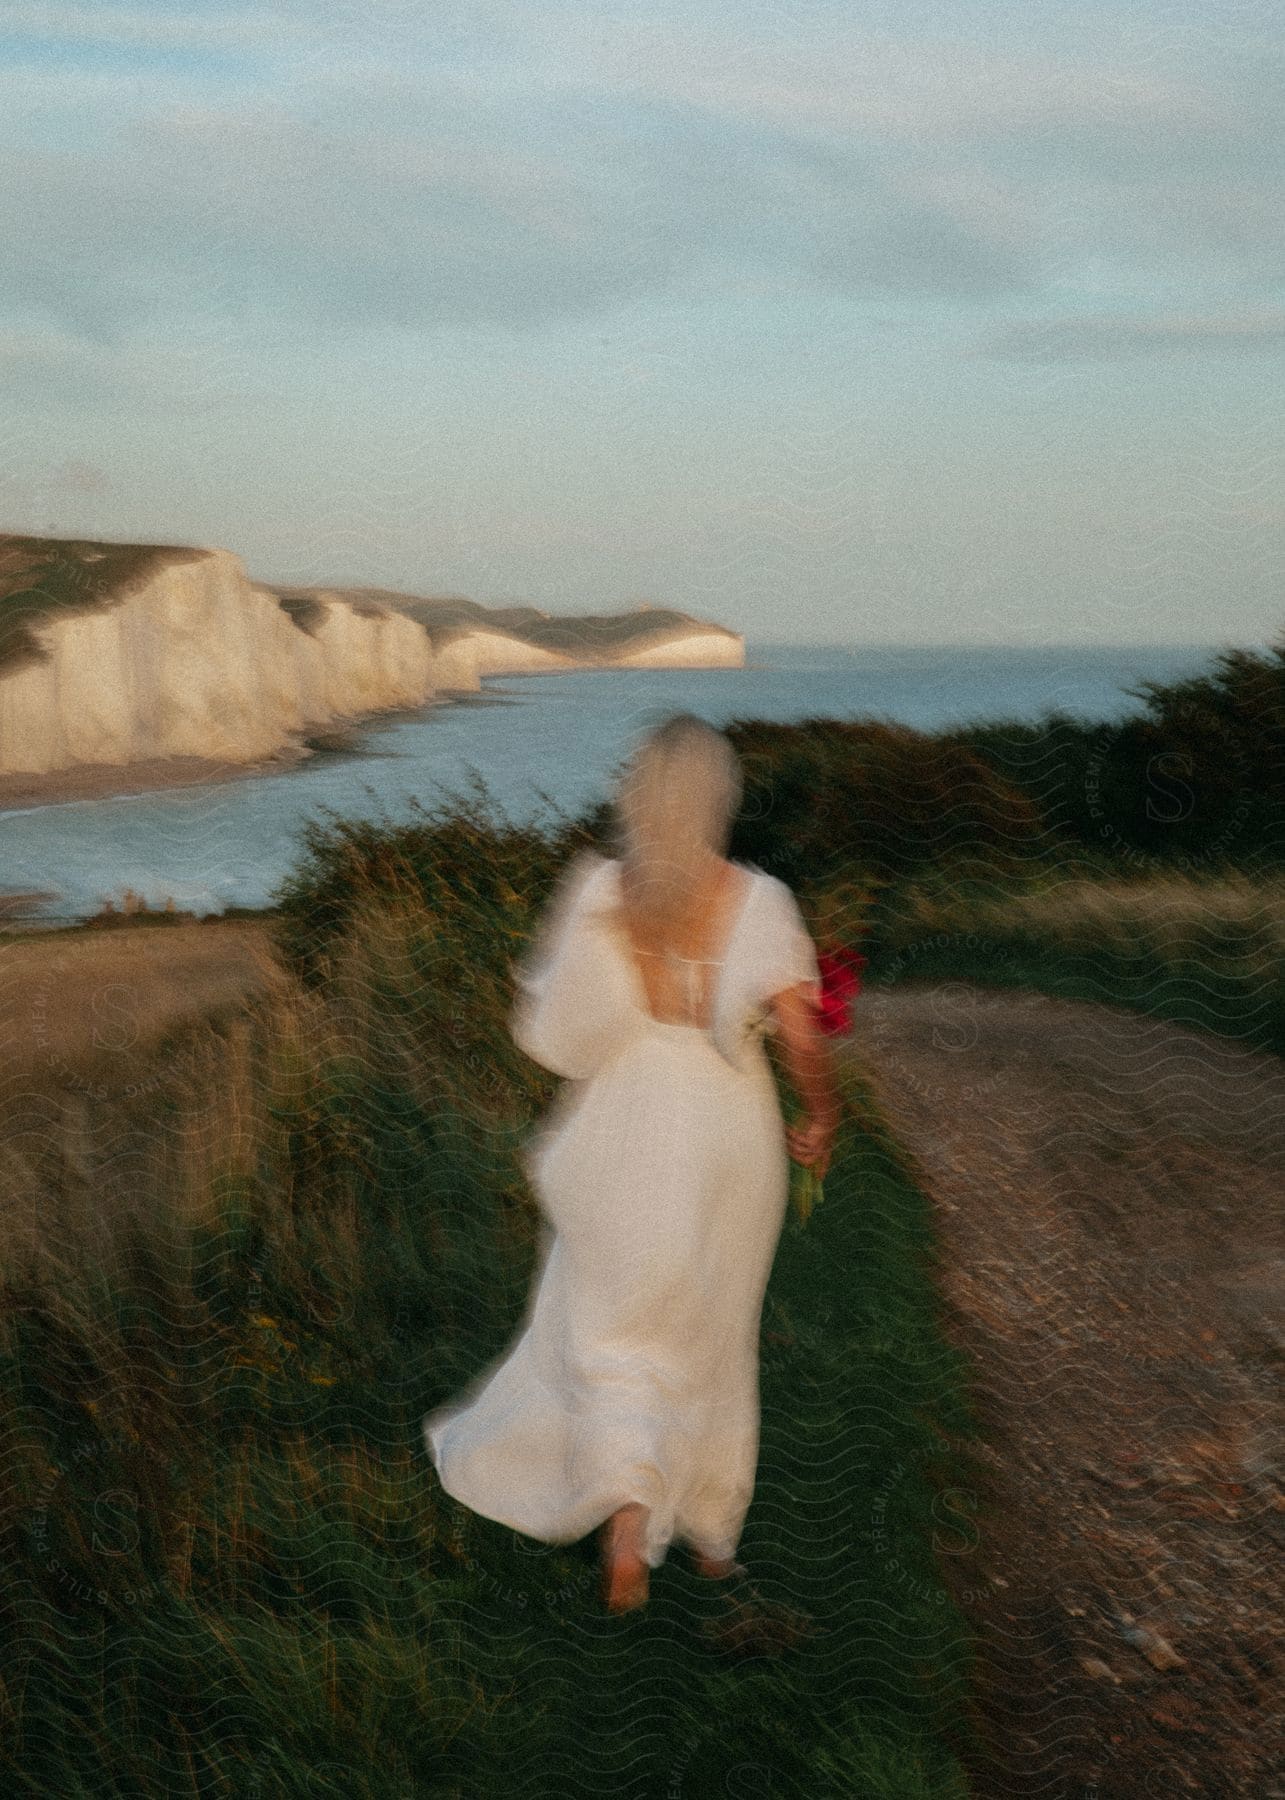 Blurry fashionably gowned figure of woman holding bouquet walks along road across water from cliff.